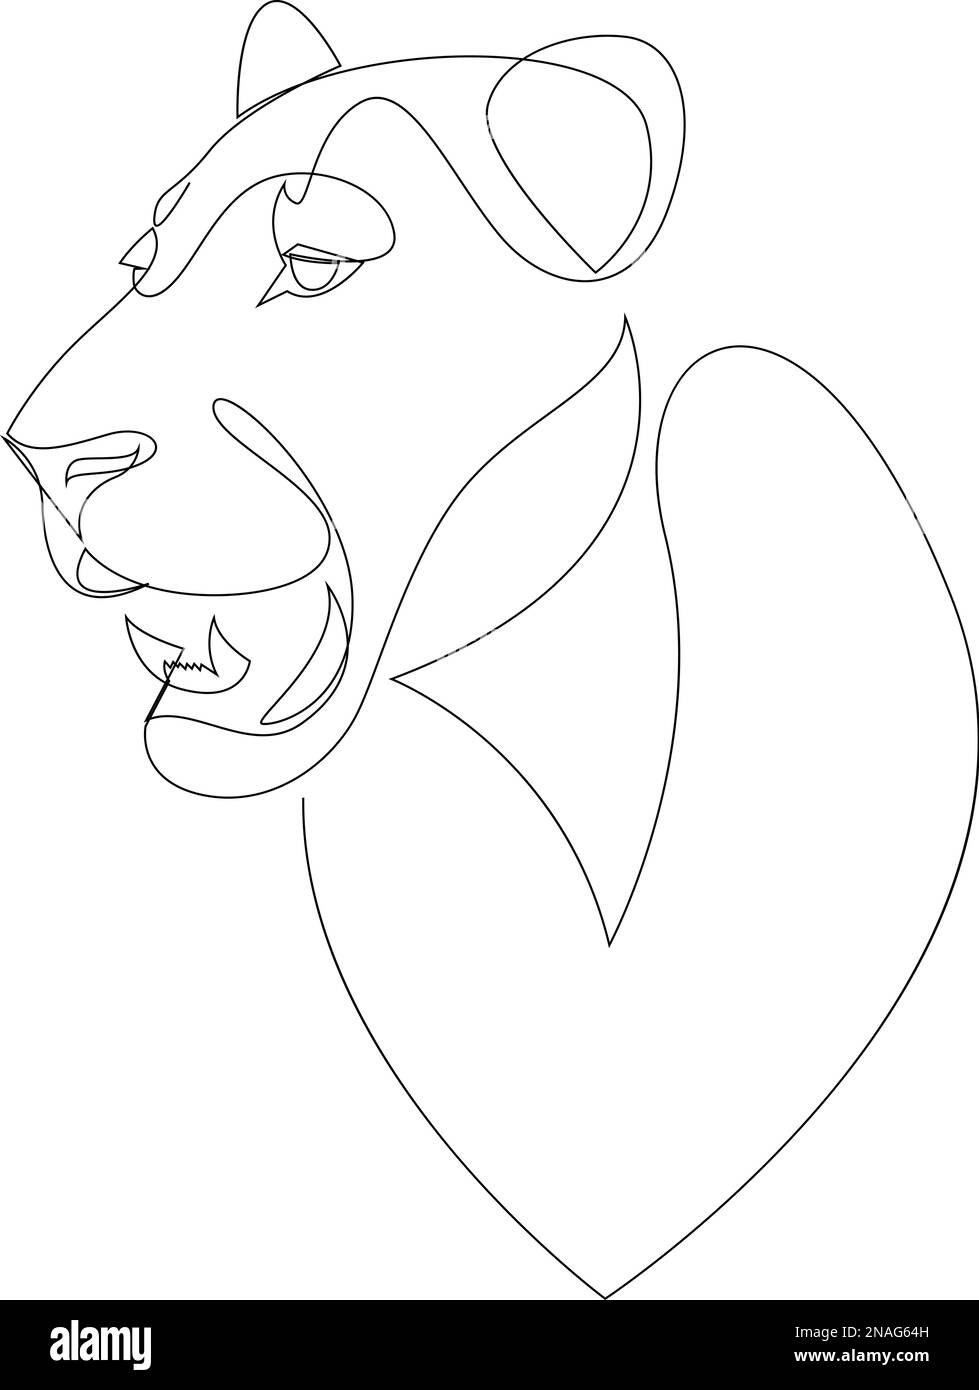 Jaguar head continuous one line drawing. Single line vector illustration. Stock Vector